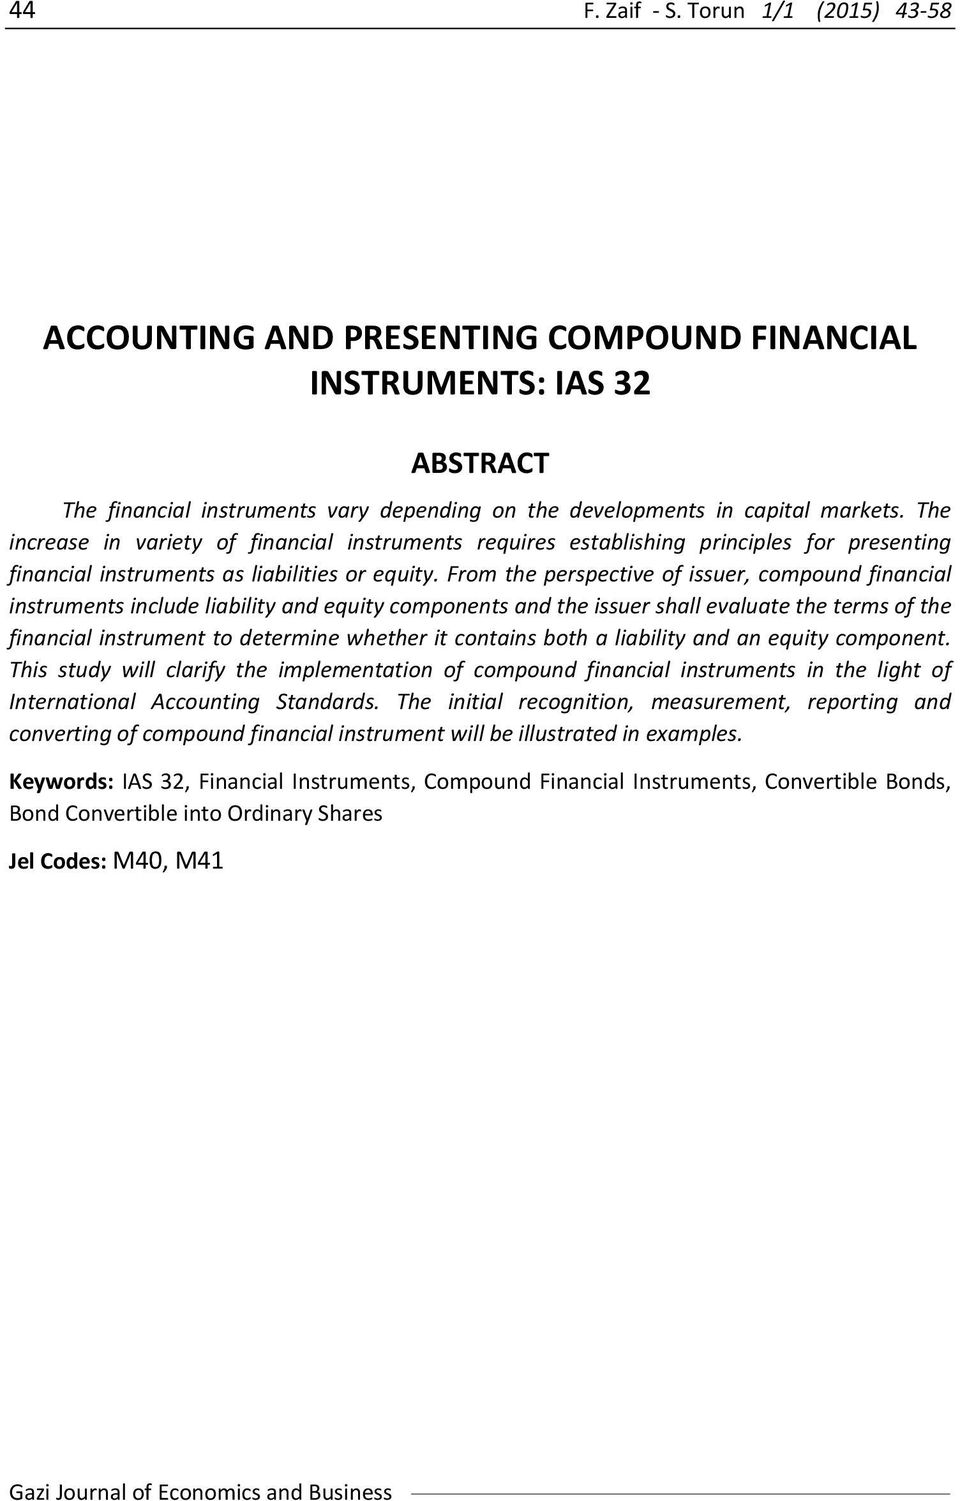 From the perspective of issuer, compound financial instruments include liability and equity components and the issuer shall evaluate the terms of the financial instrument to determine whether it